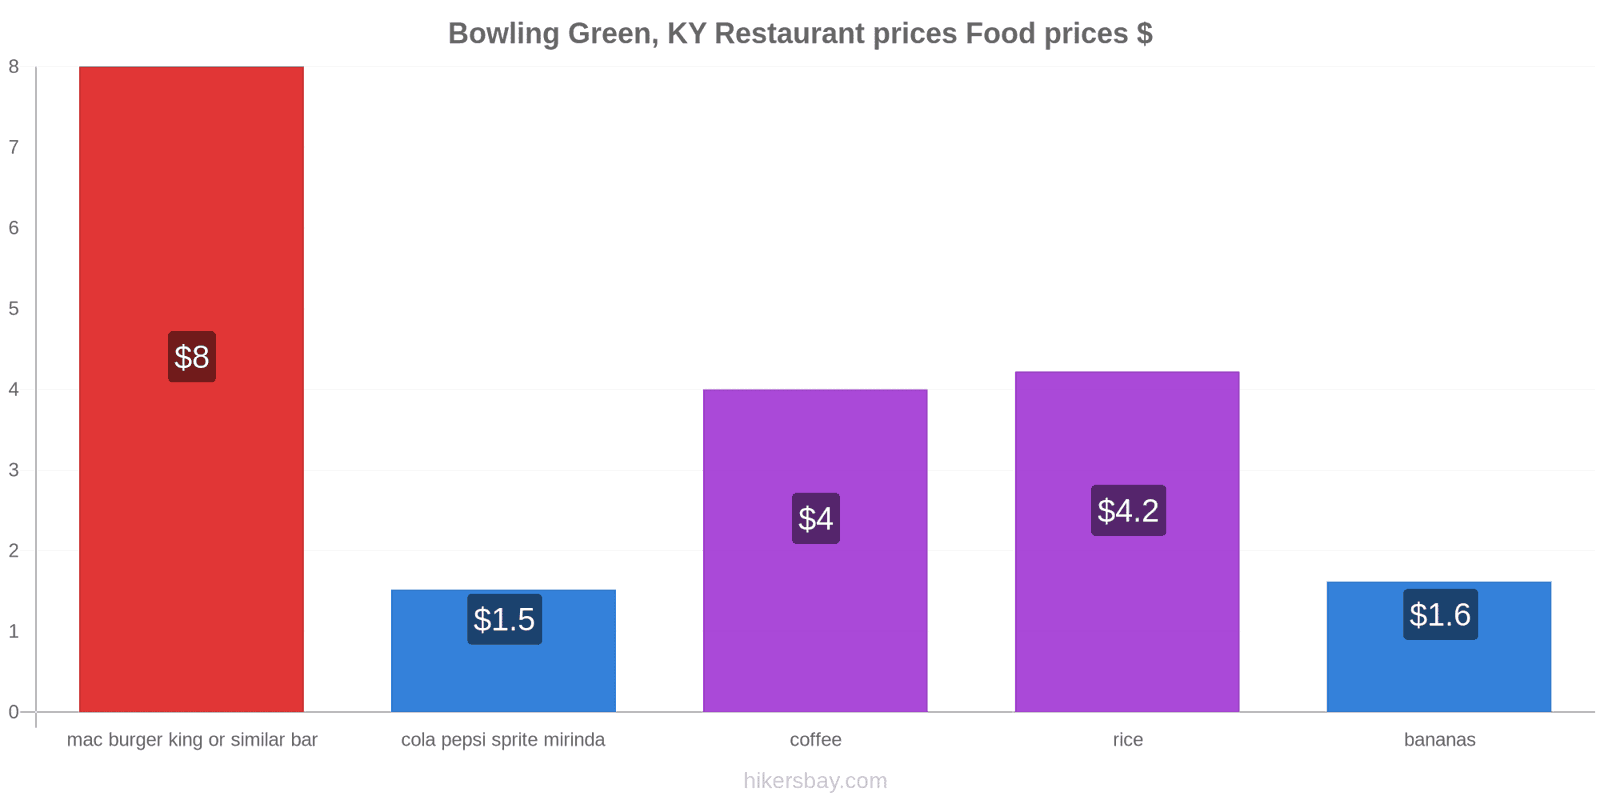 Bowling Green, KY price changes hikersbay.com